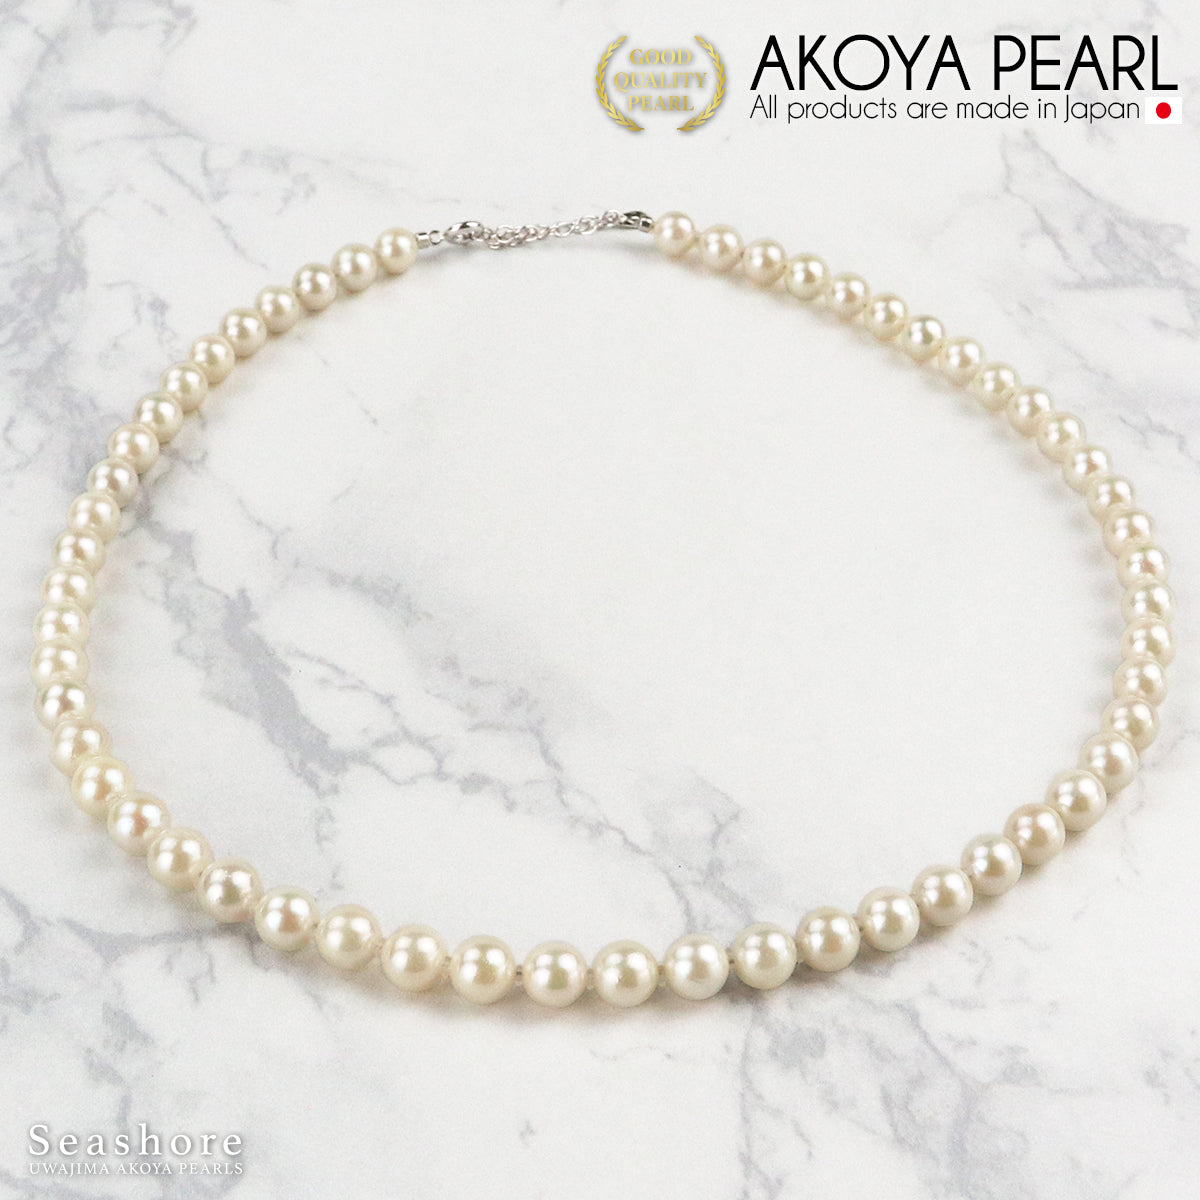 Akoya pearl necklace 1 strand [6.5-7.0mm] SV925 with adjuster, identification certificate, cardboard case (4031)